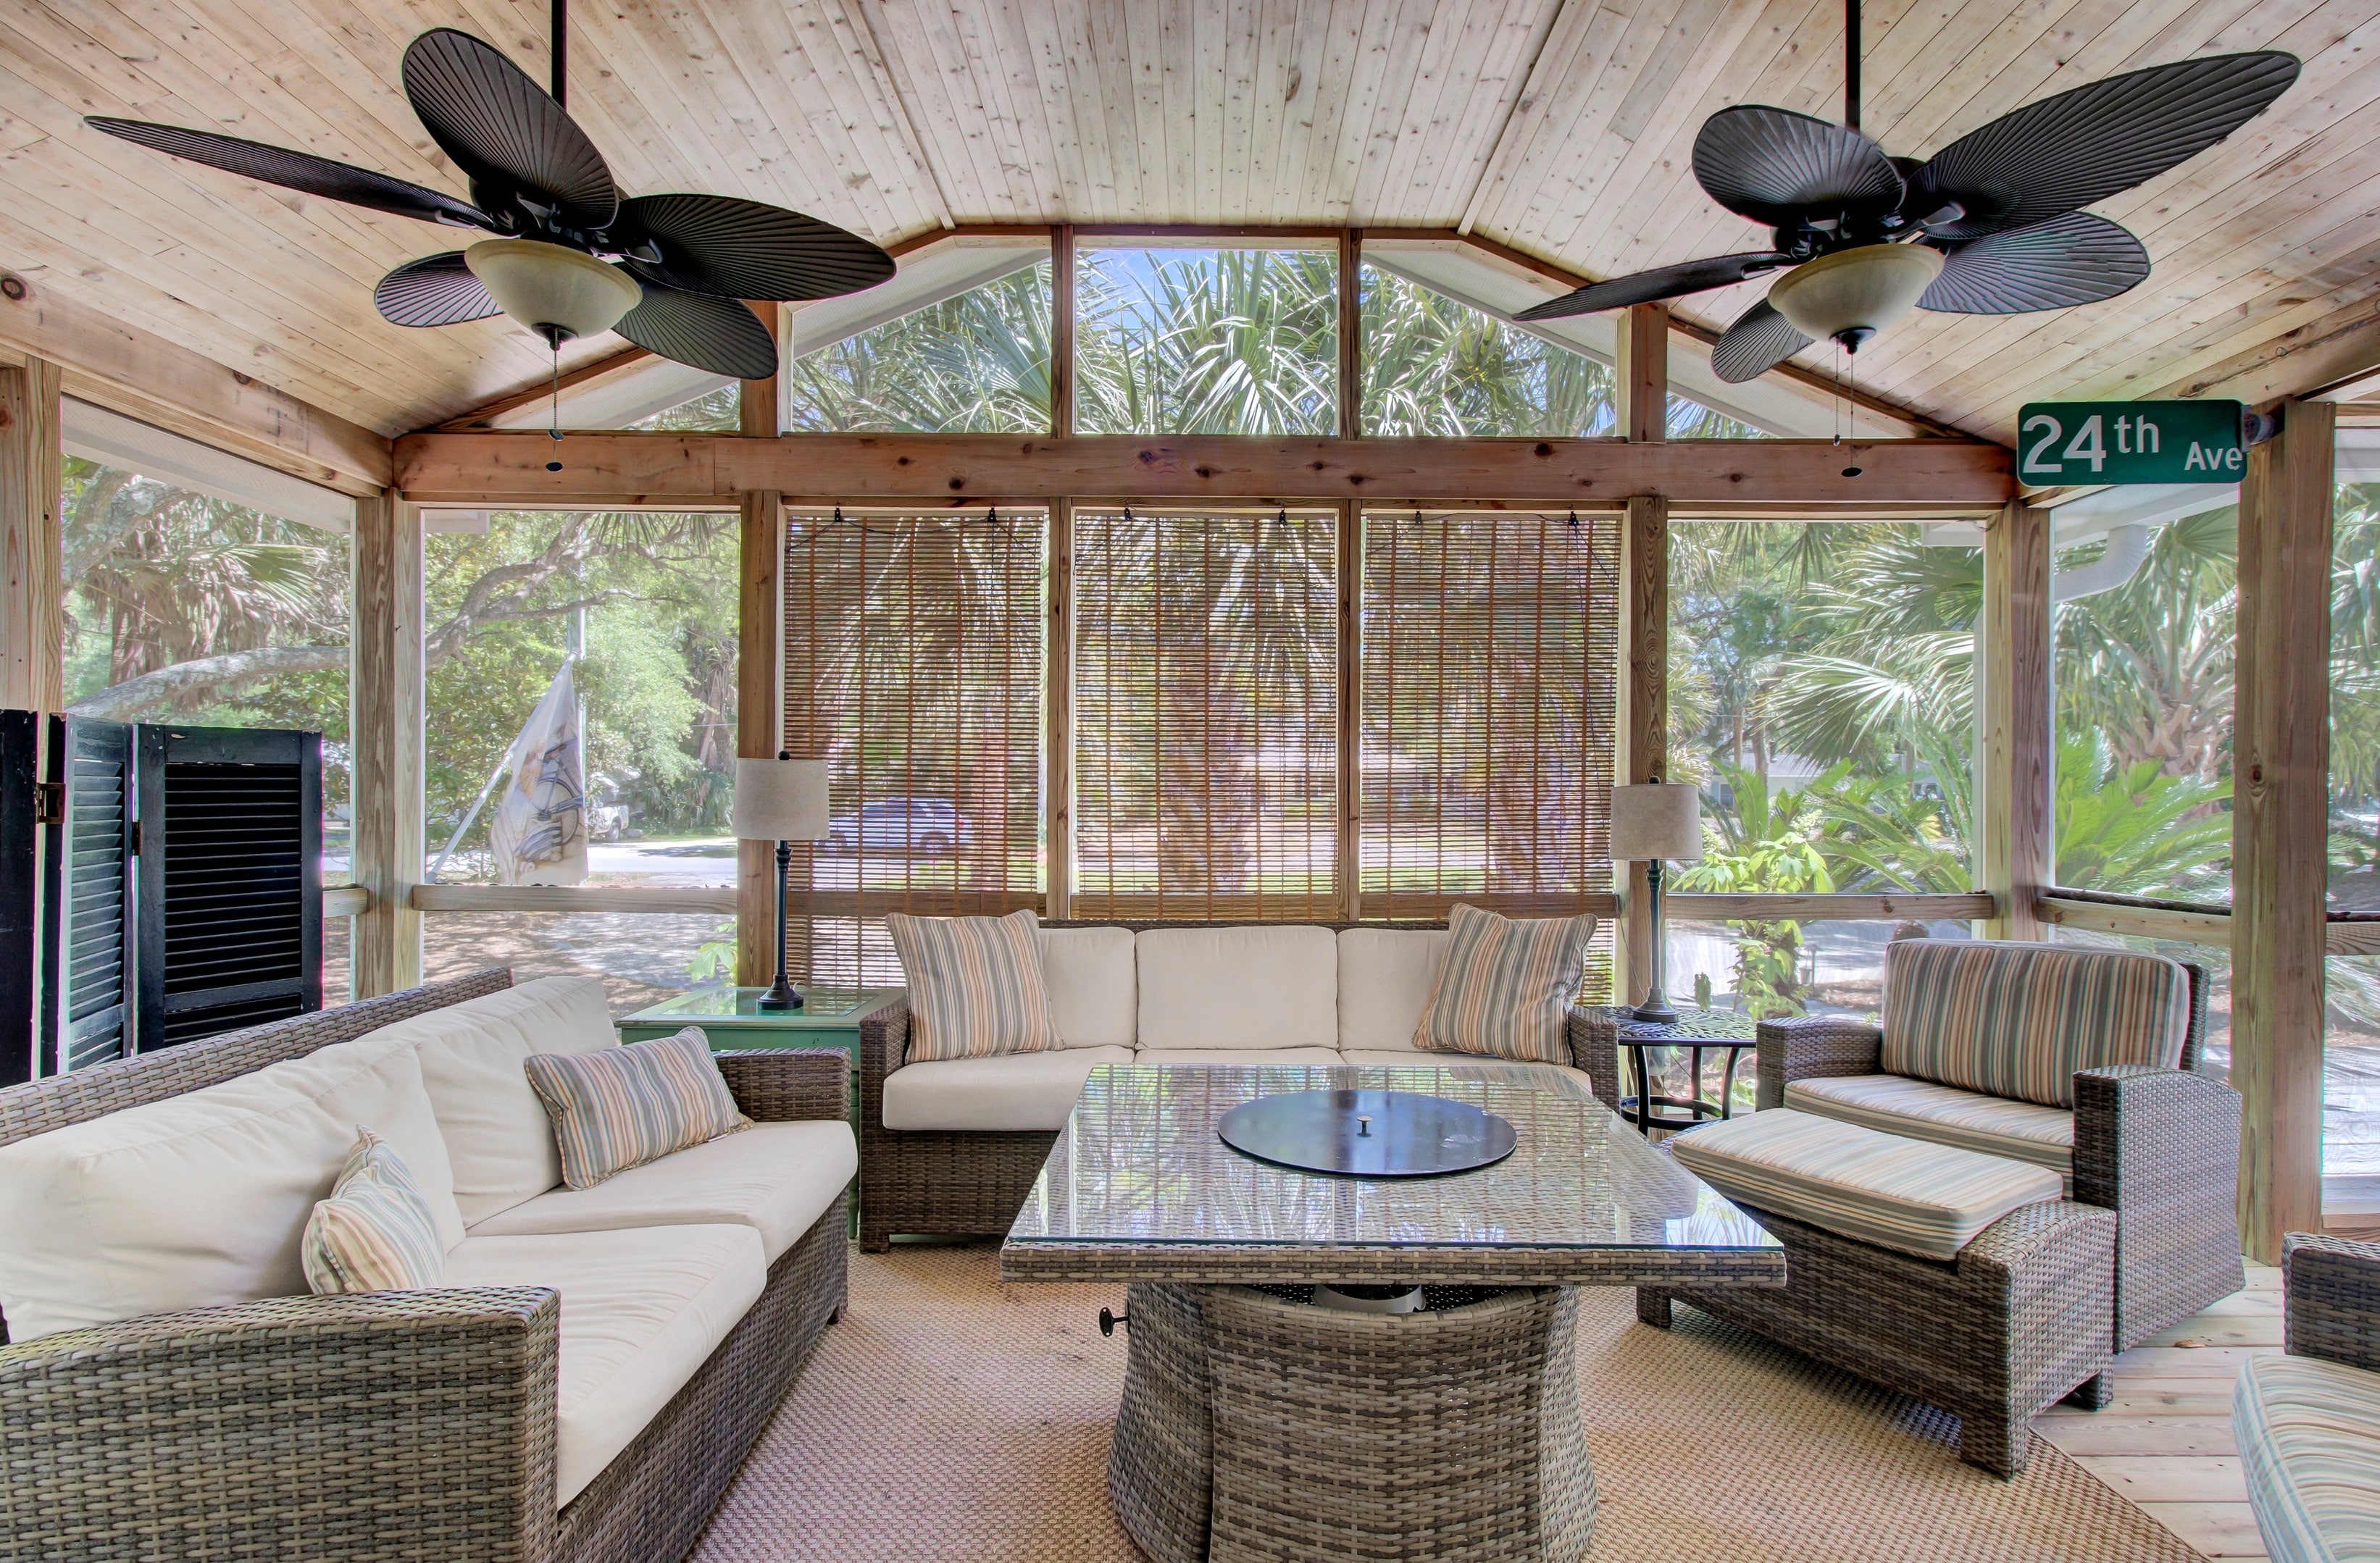 Outdoor, screened-in living space on the porch.